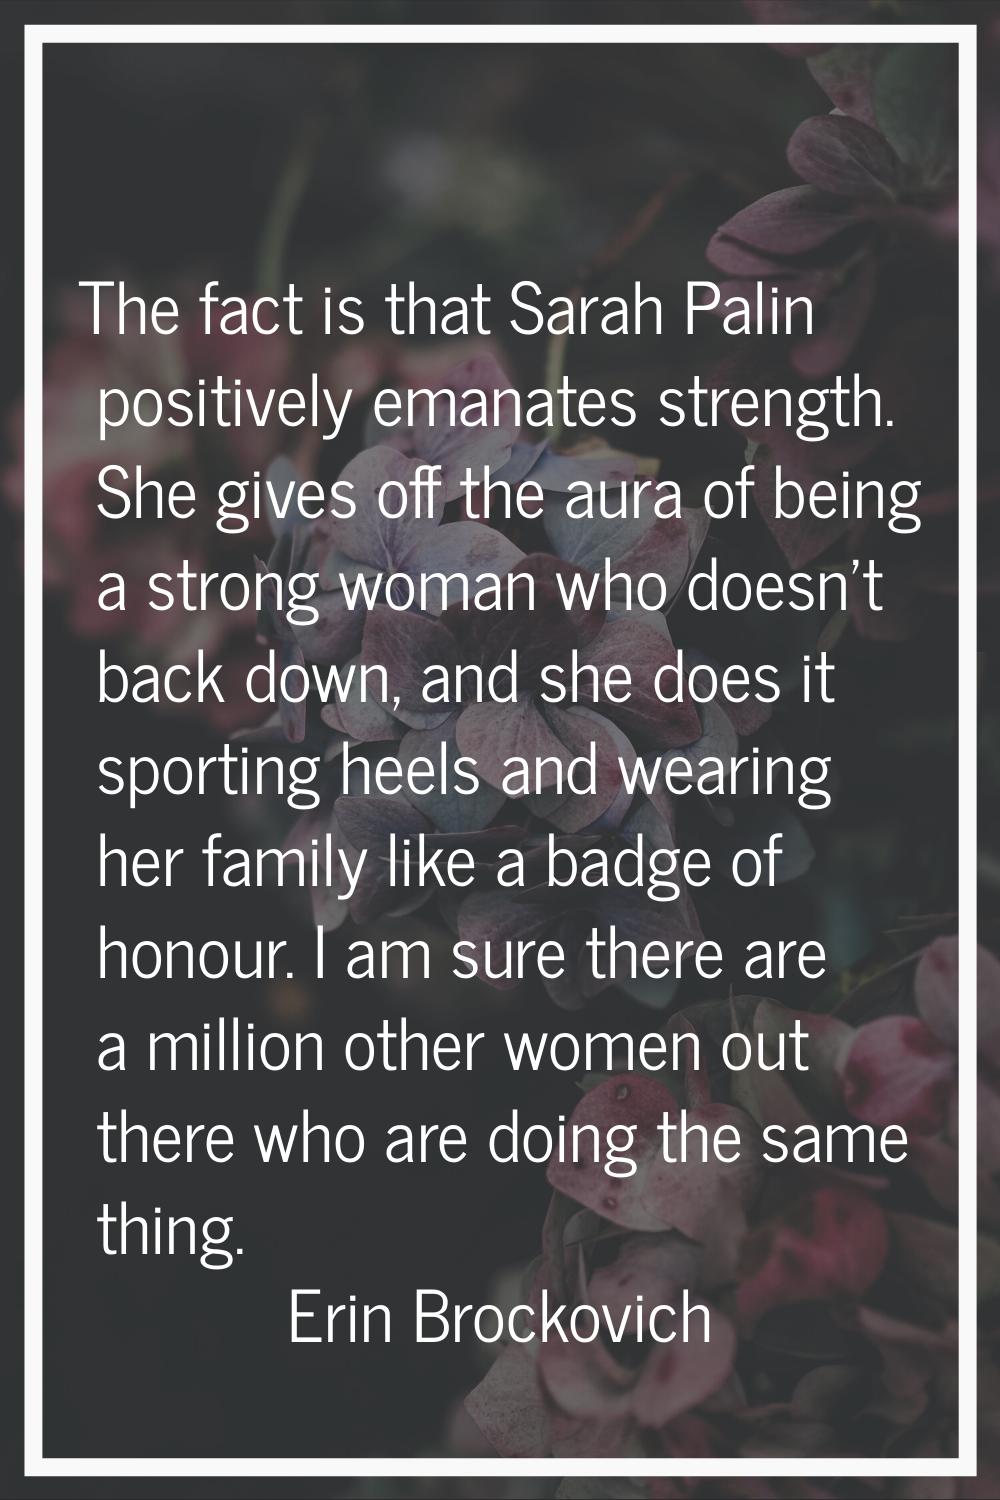 The fact is that Sarah Palin positively emanates strength. She gives off the aura of being a strong